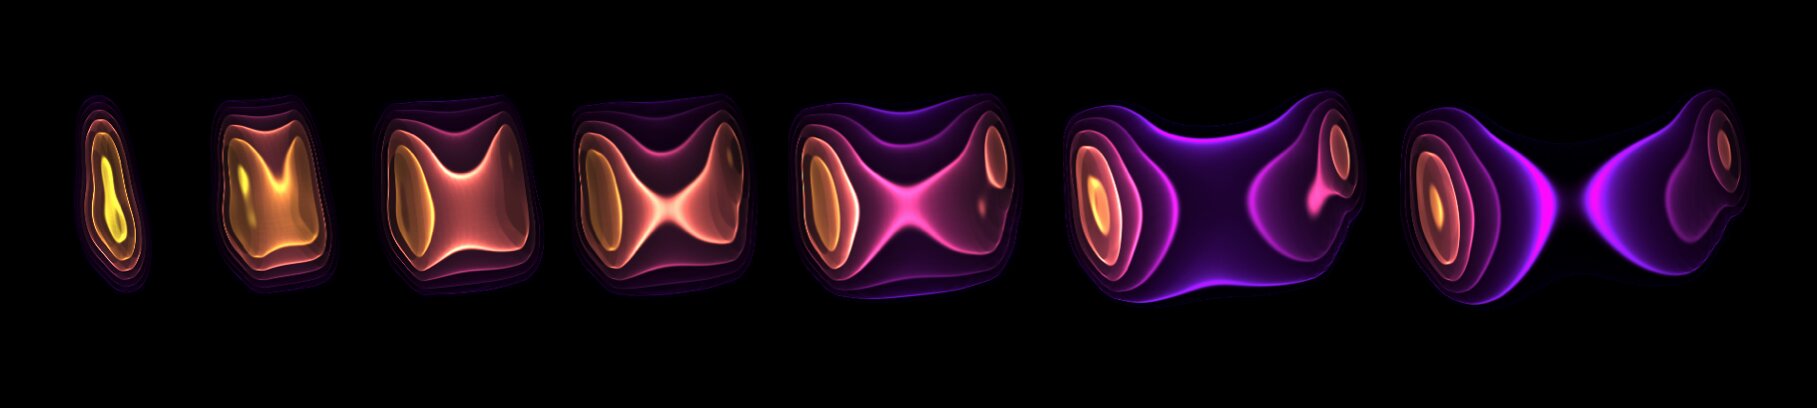 Particles of light may create fluid flow, data-theory comparison suggests